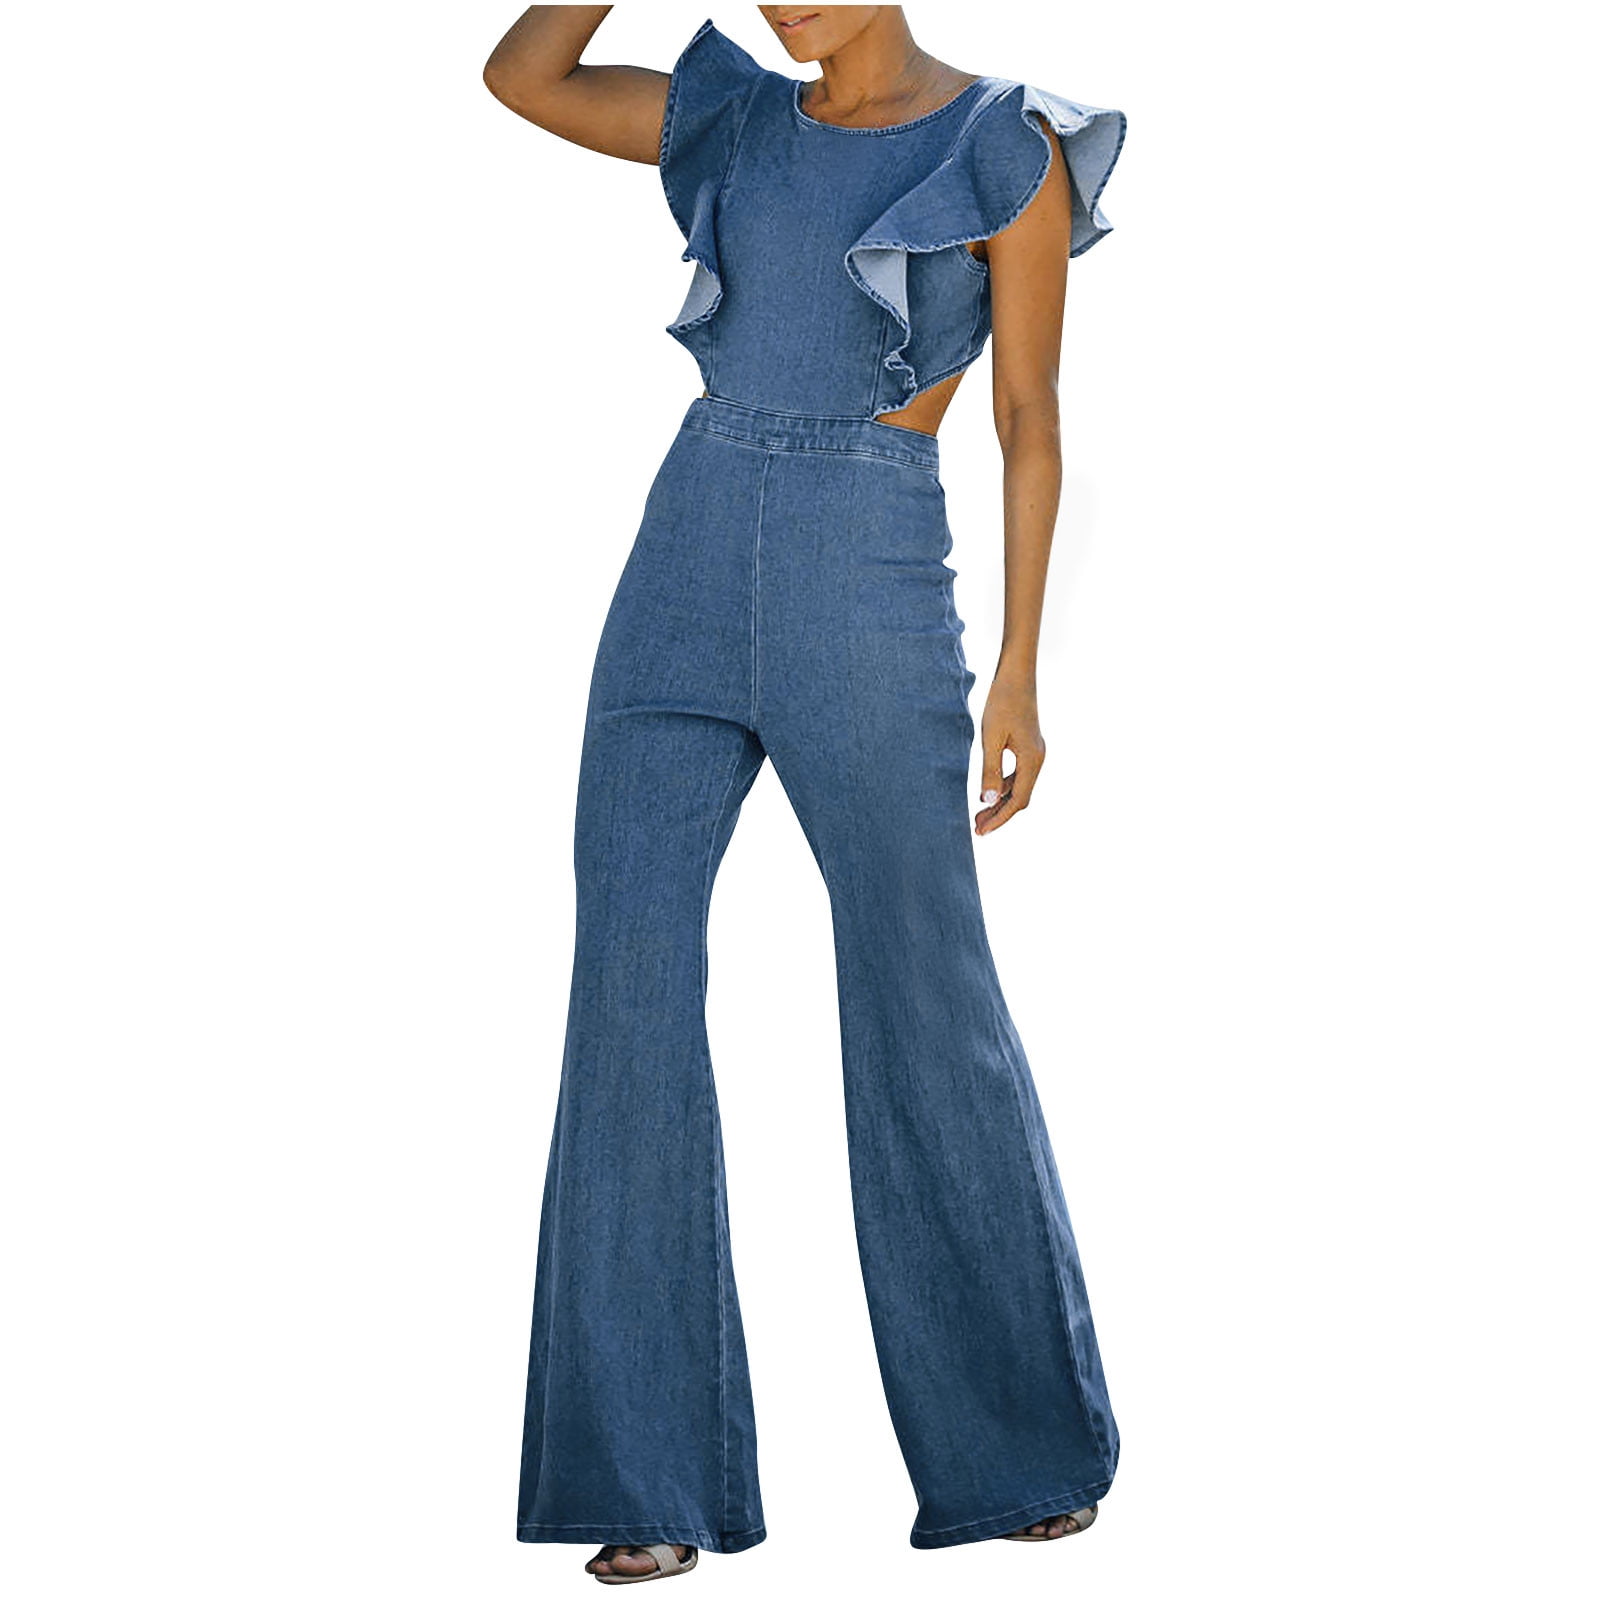 Jumpsuits for Women Sexy, Denim Jean Rompers Womens Cut Out Backless Ruffle  Sleeves Slim Bell Bottom Jumpsuit